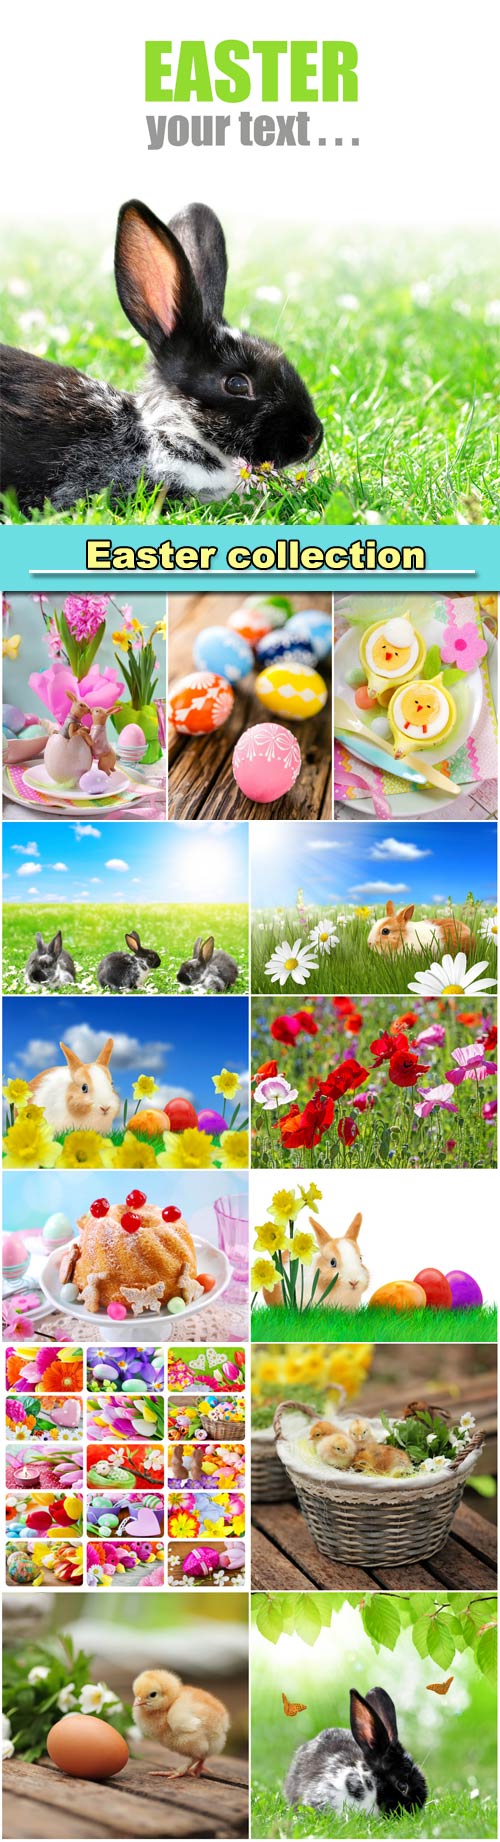 Easter collection, rabbits and chickens, Easter eggs